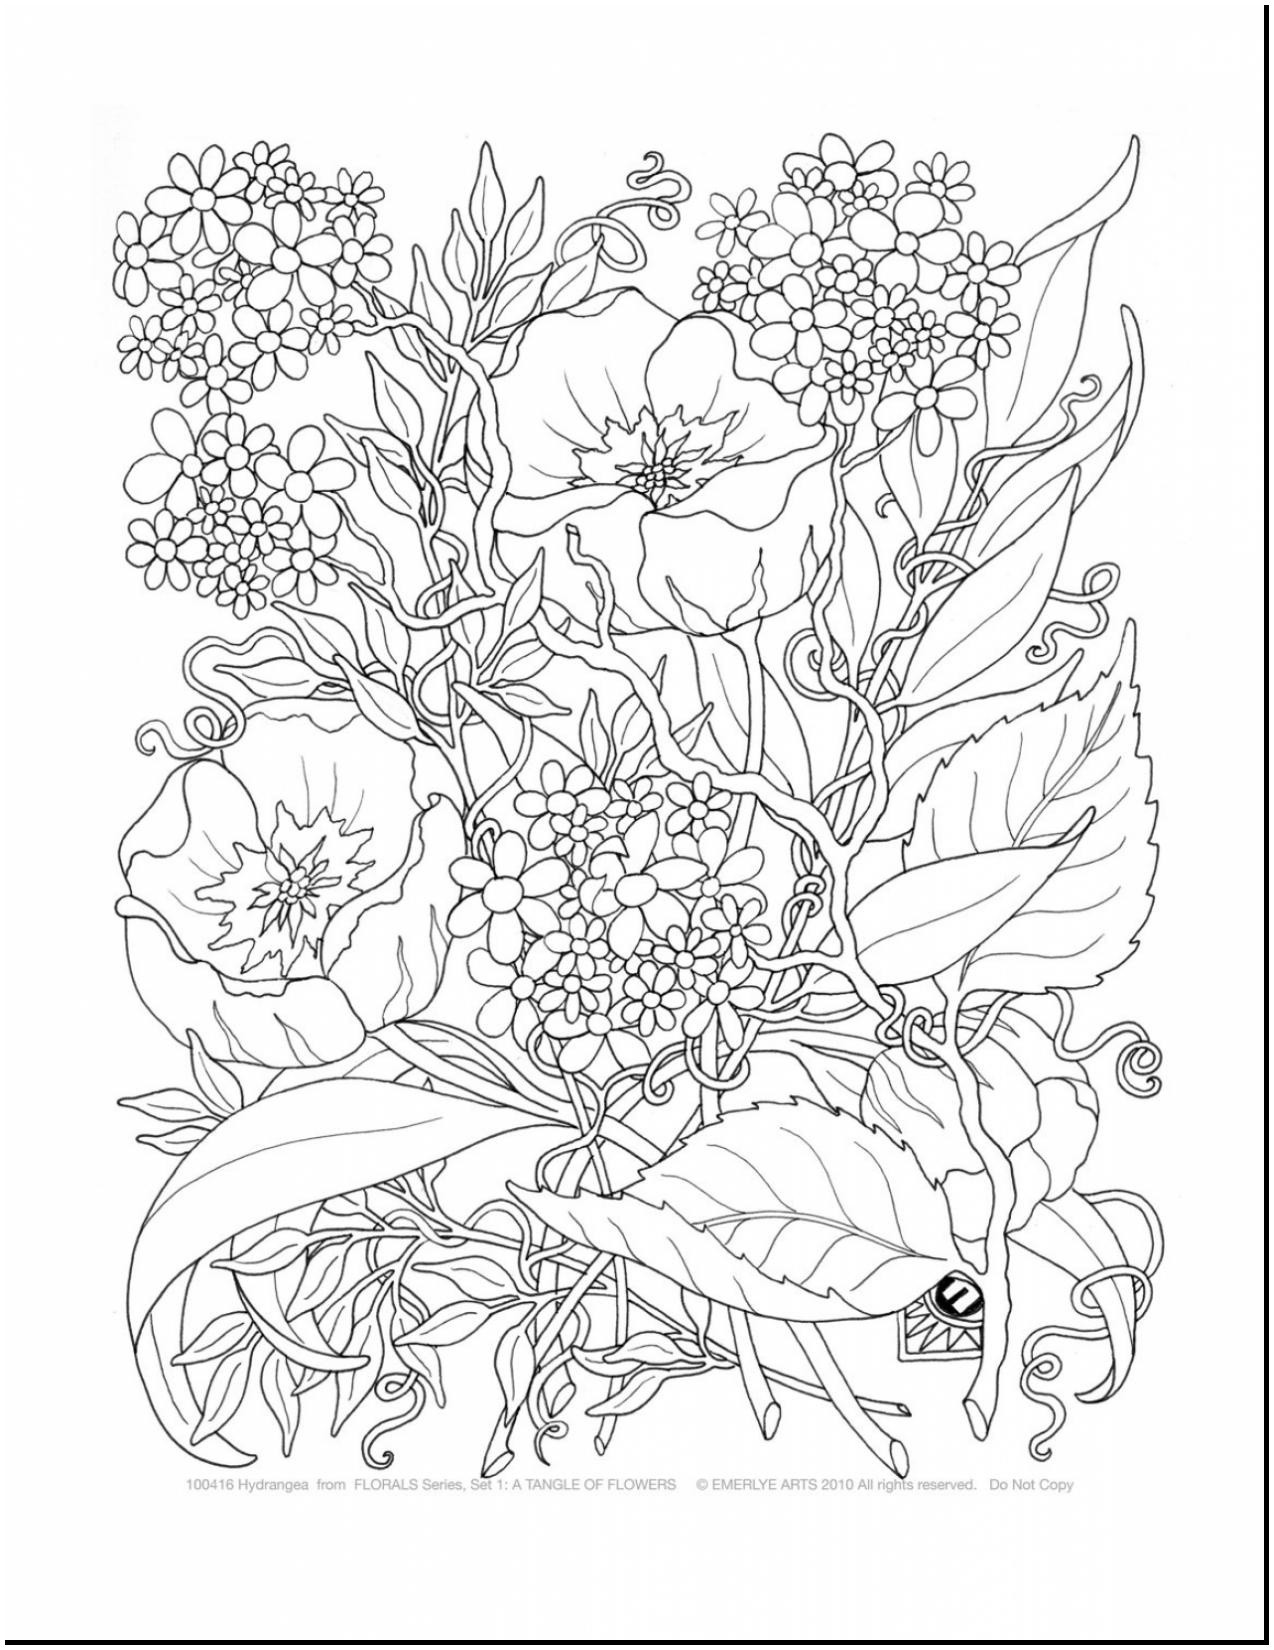 21 Unique Vase with Hydrangeas 2024 free download vase with hydrangeas of beautiful cool vases flower vase coloring page pages flowers in a intended for beautiful cool vases flower vase coloring page pages flowers in a printable adult color